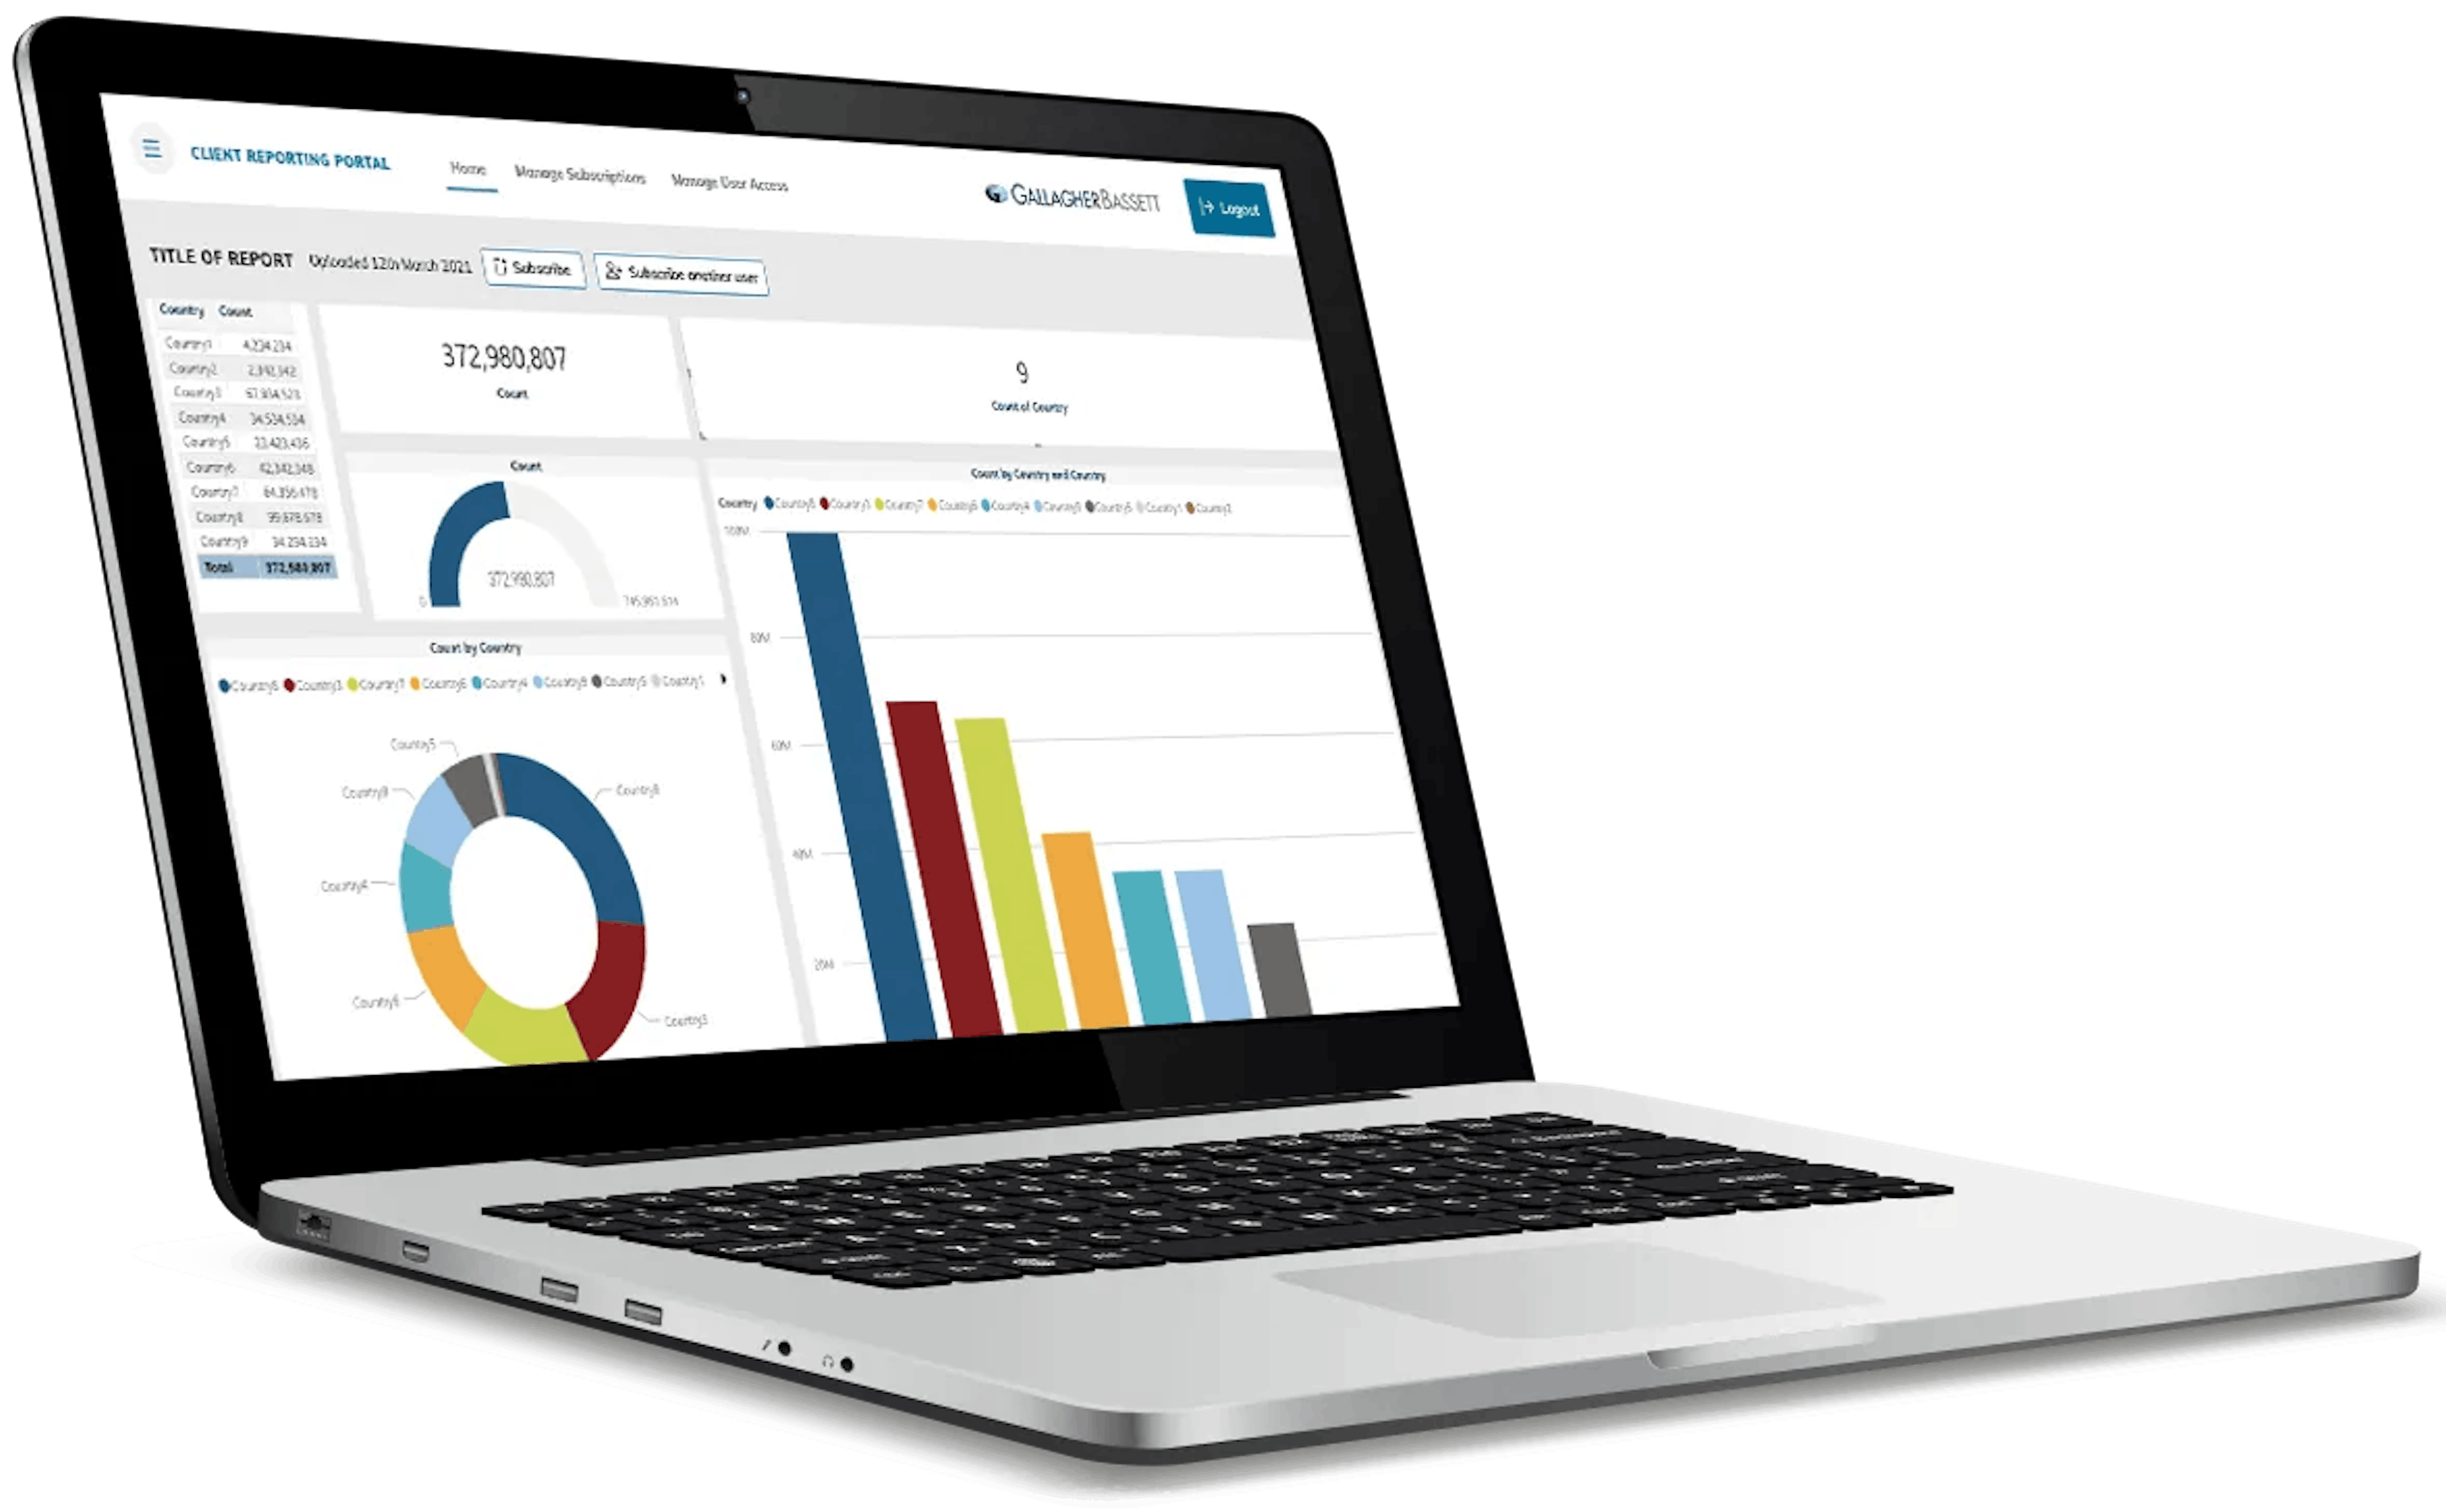 Comcover Business Intelligence